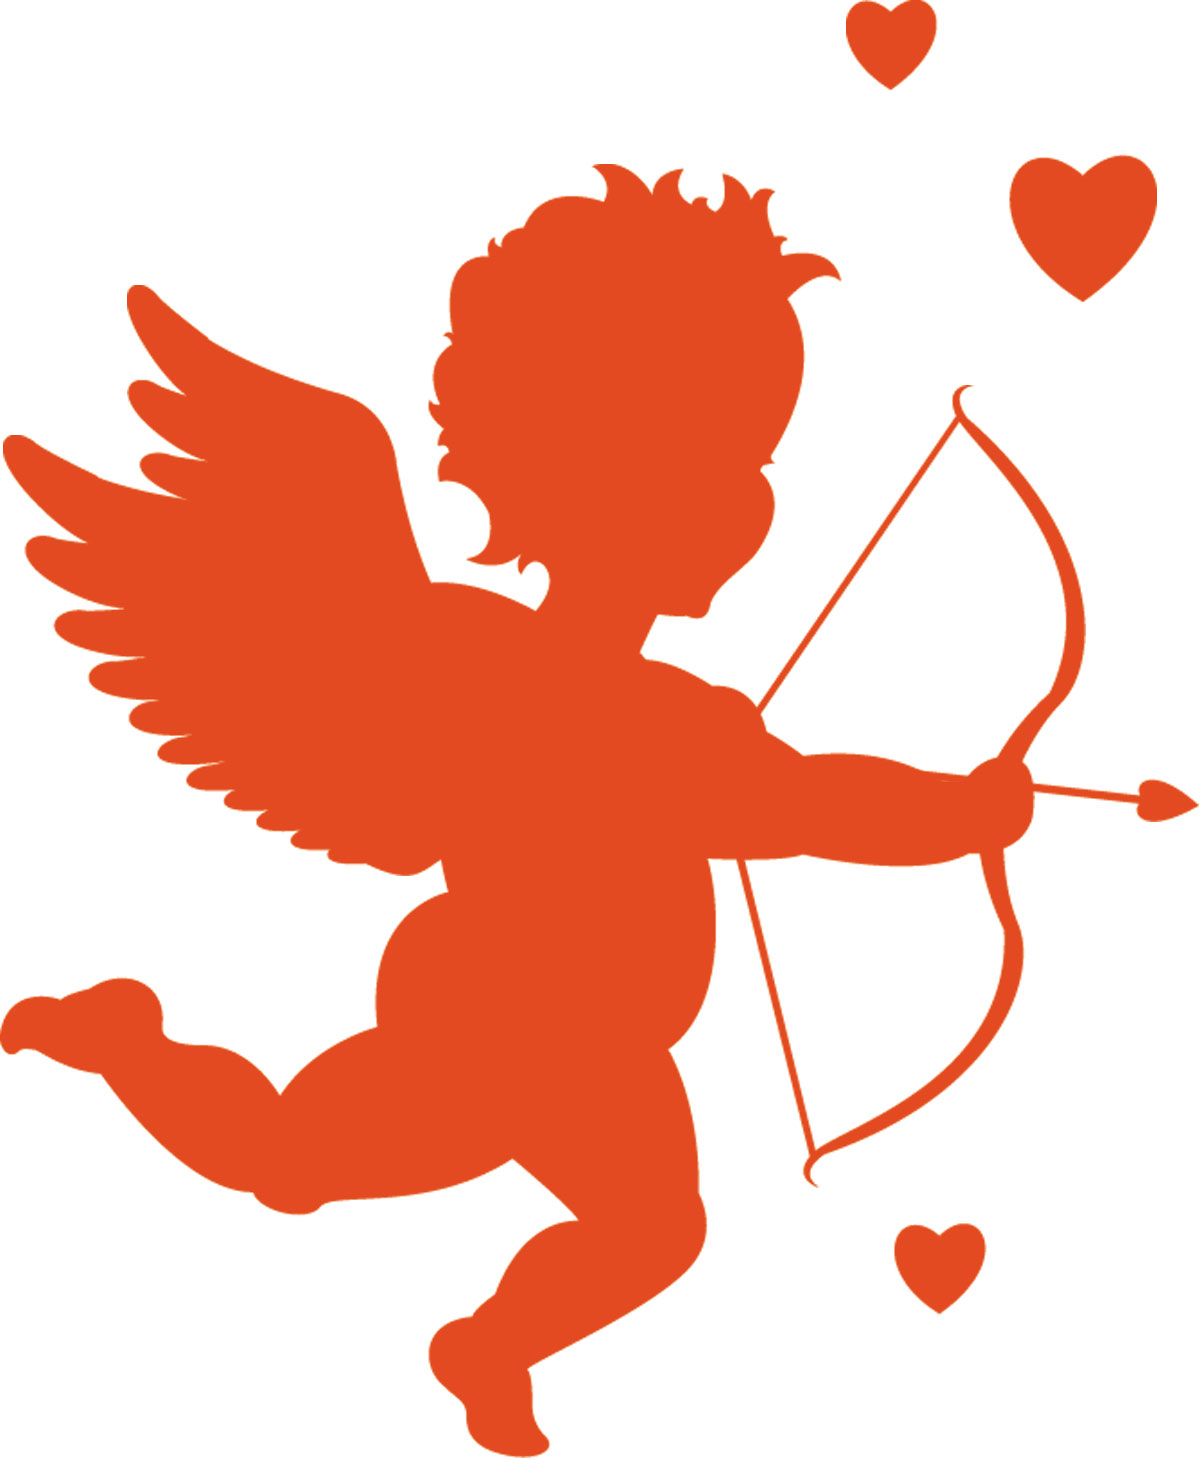 Best Photos of Cupid Heart Clip Art - Valentine's Day Cupid Clip ...